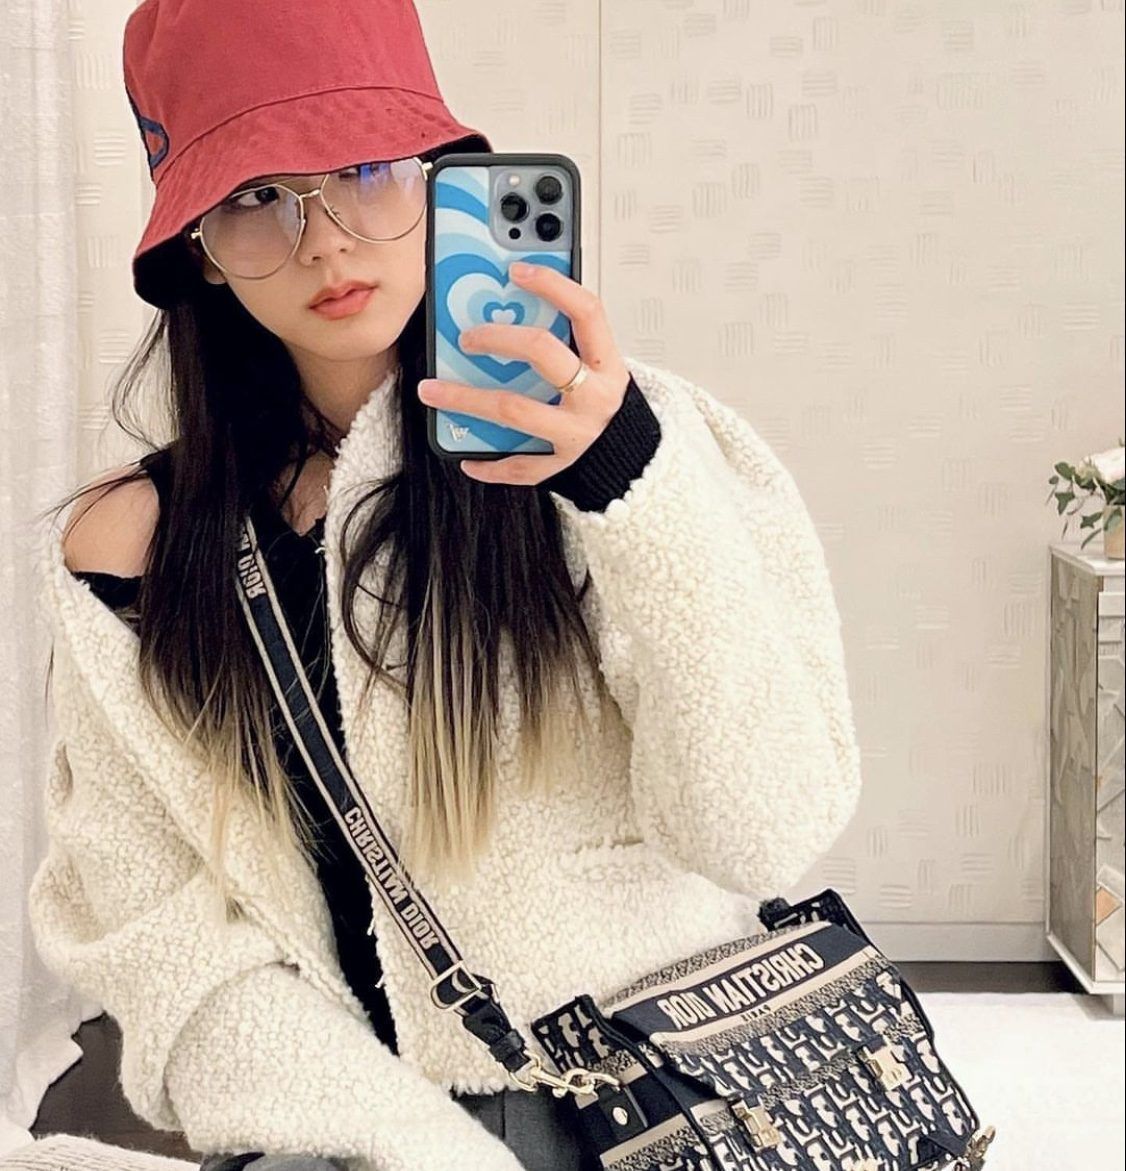 Girl classic outfits aesthetic style spring 2021 cute korean shopping  instagram college